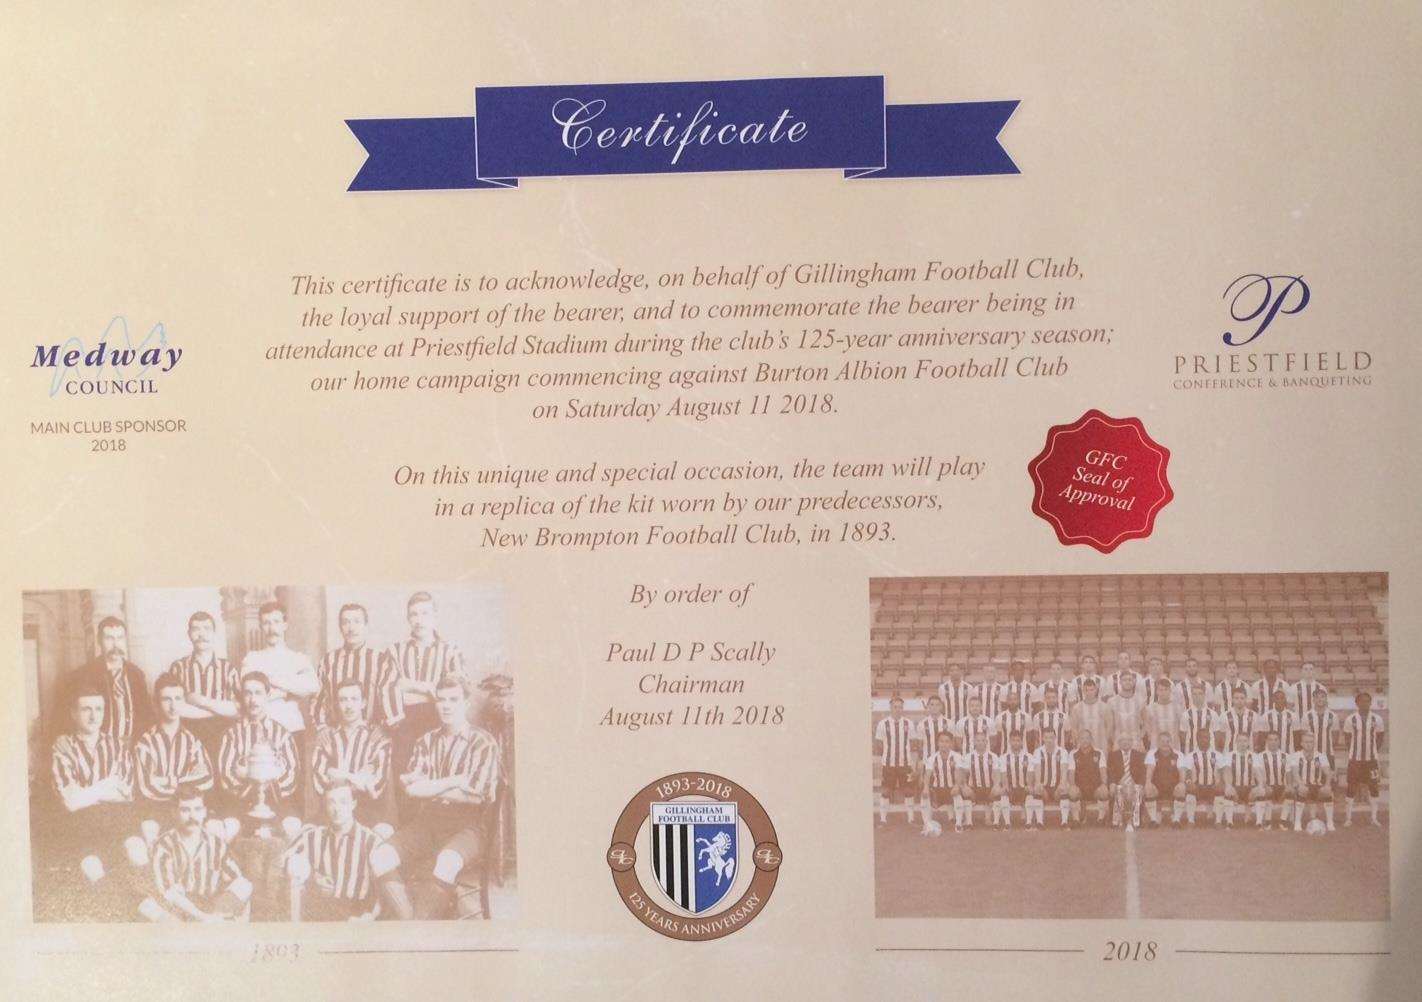 Gillingham certificate to fans for attending Saturday's match (3550209)